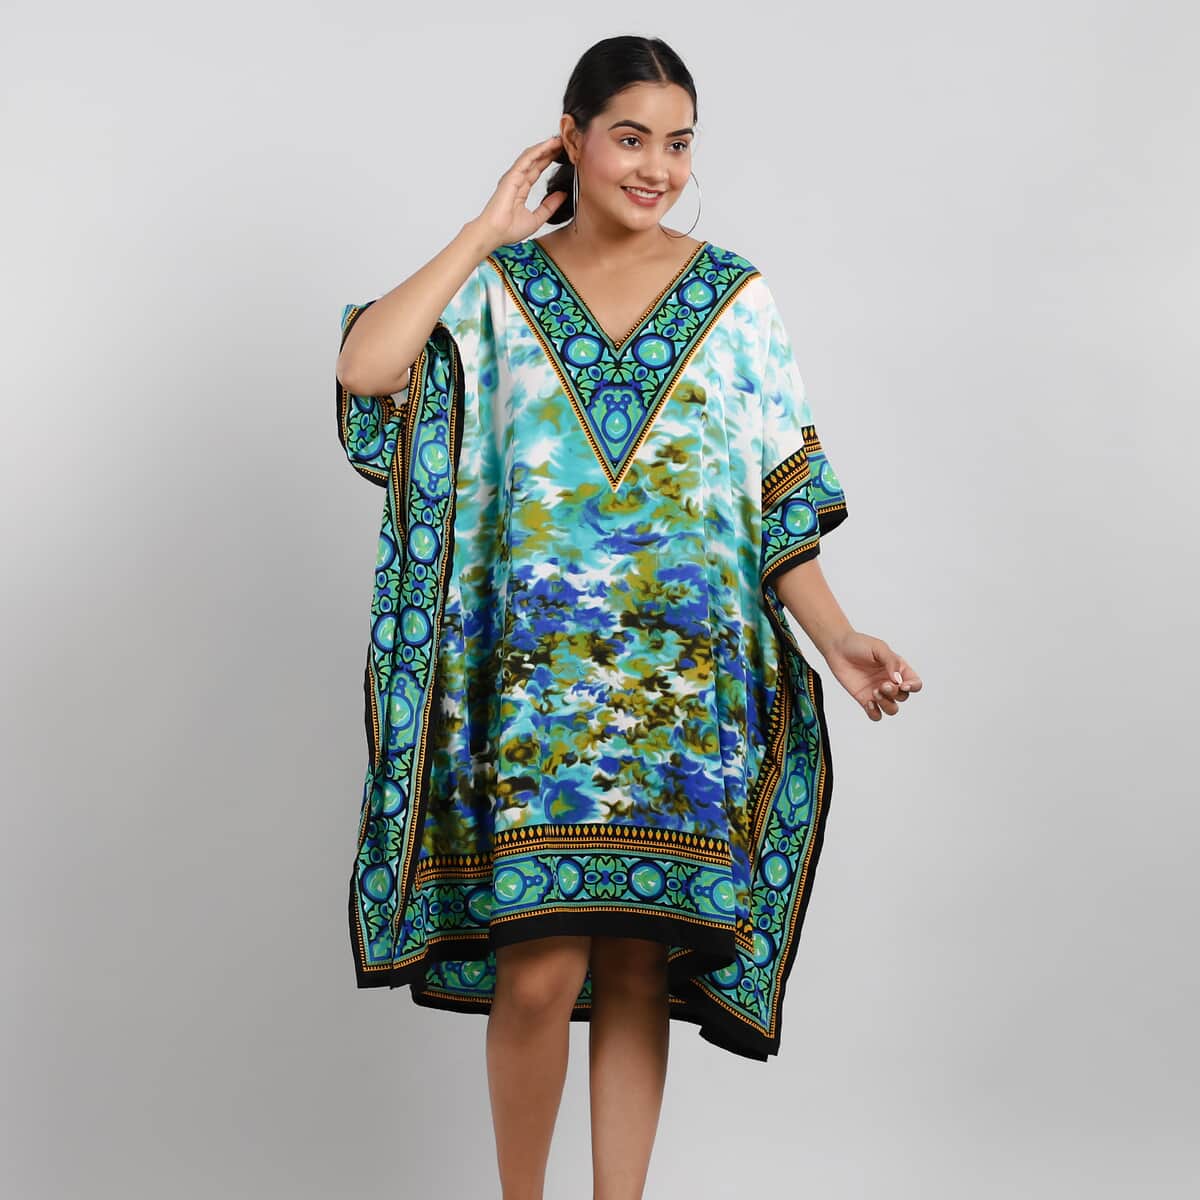 TAMSY Blue Floral Screen Printed Mid Short Kaftan - One Size Fits Most (36"x41") image number 0